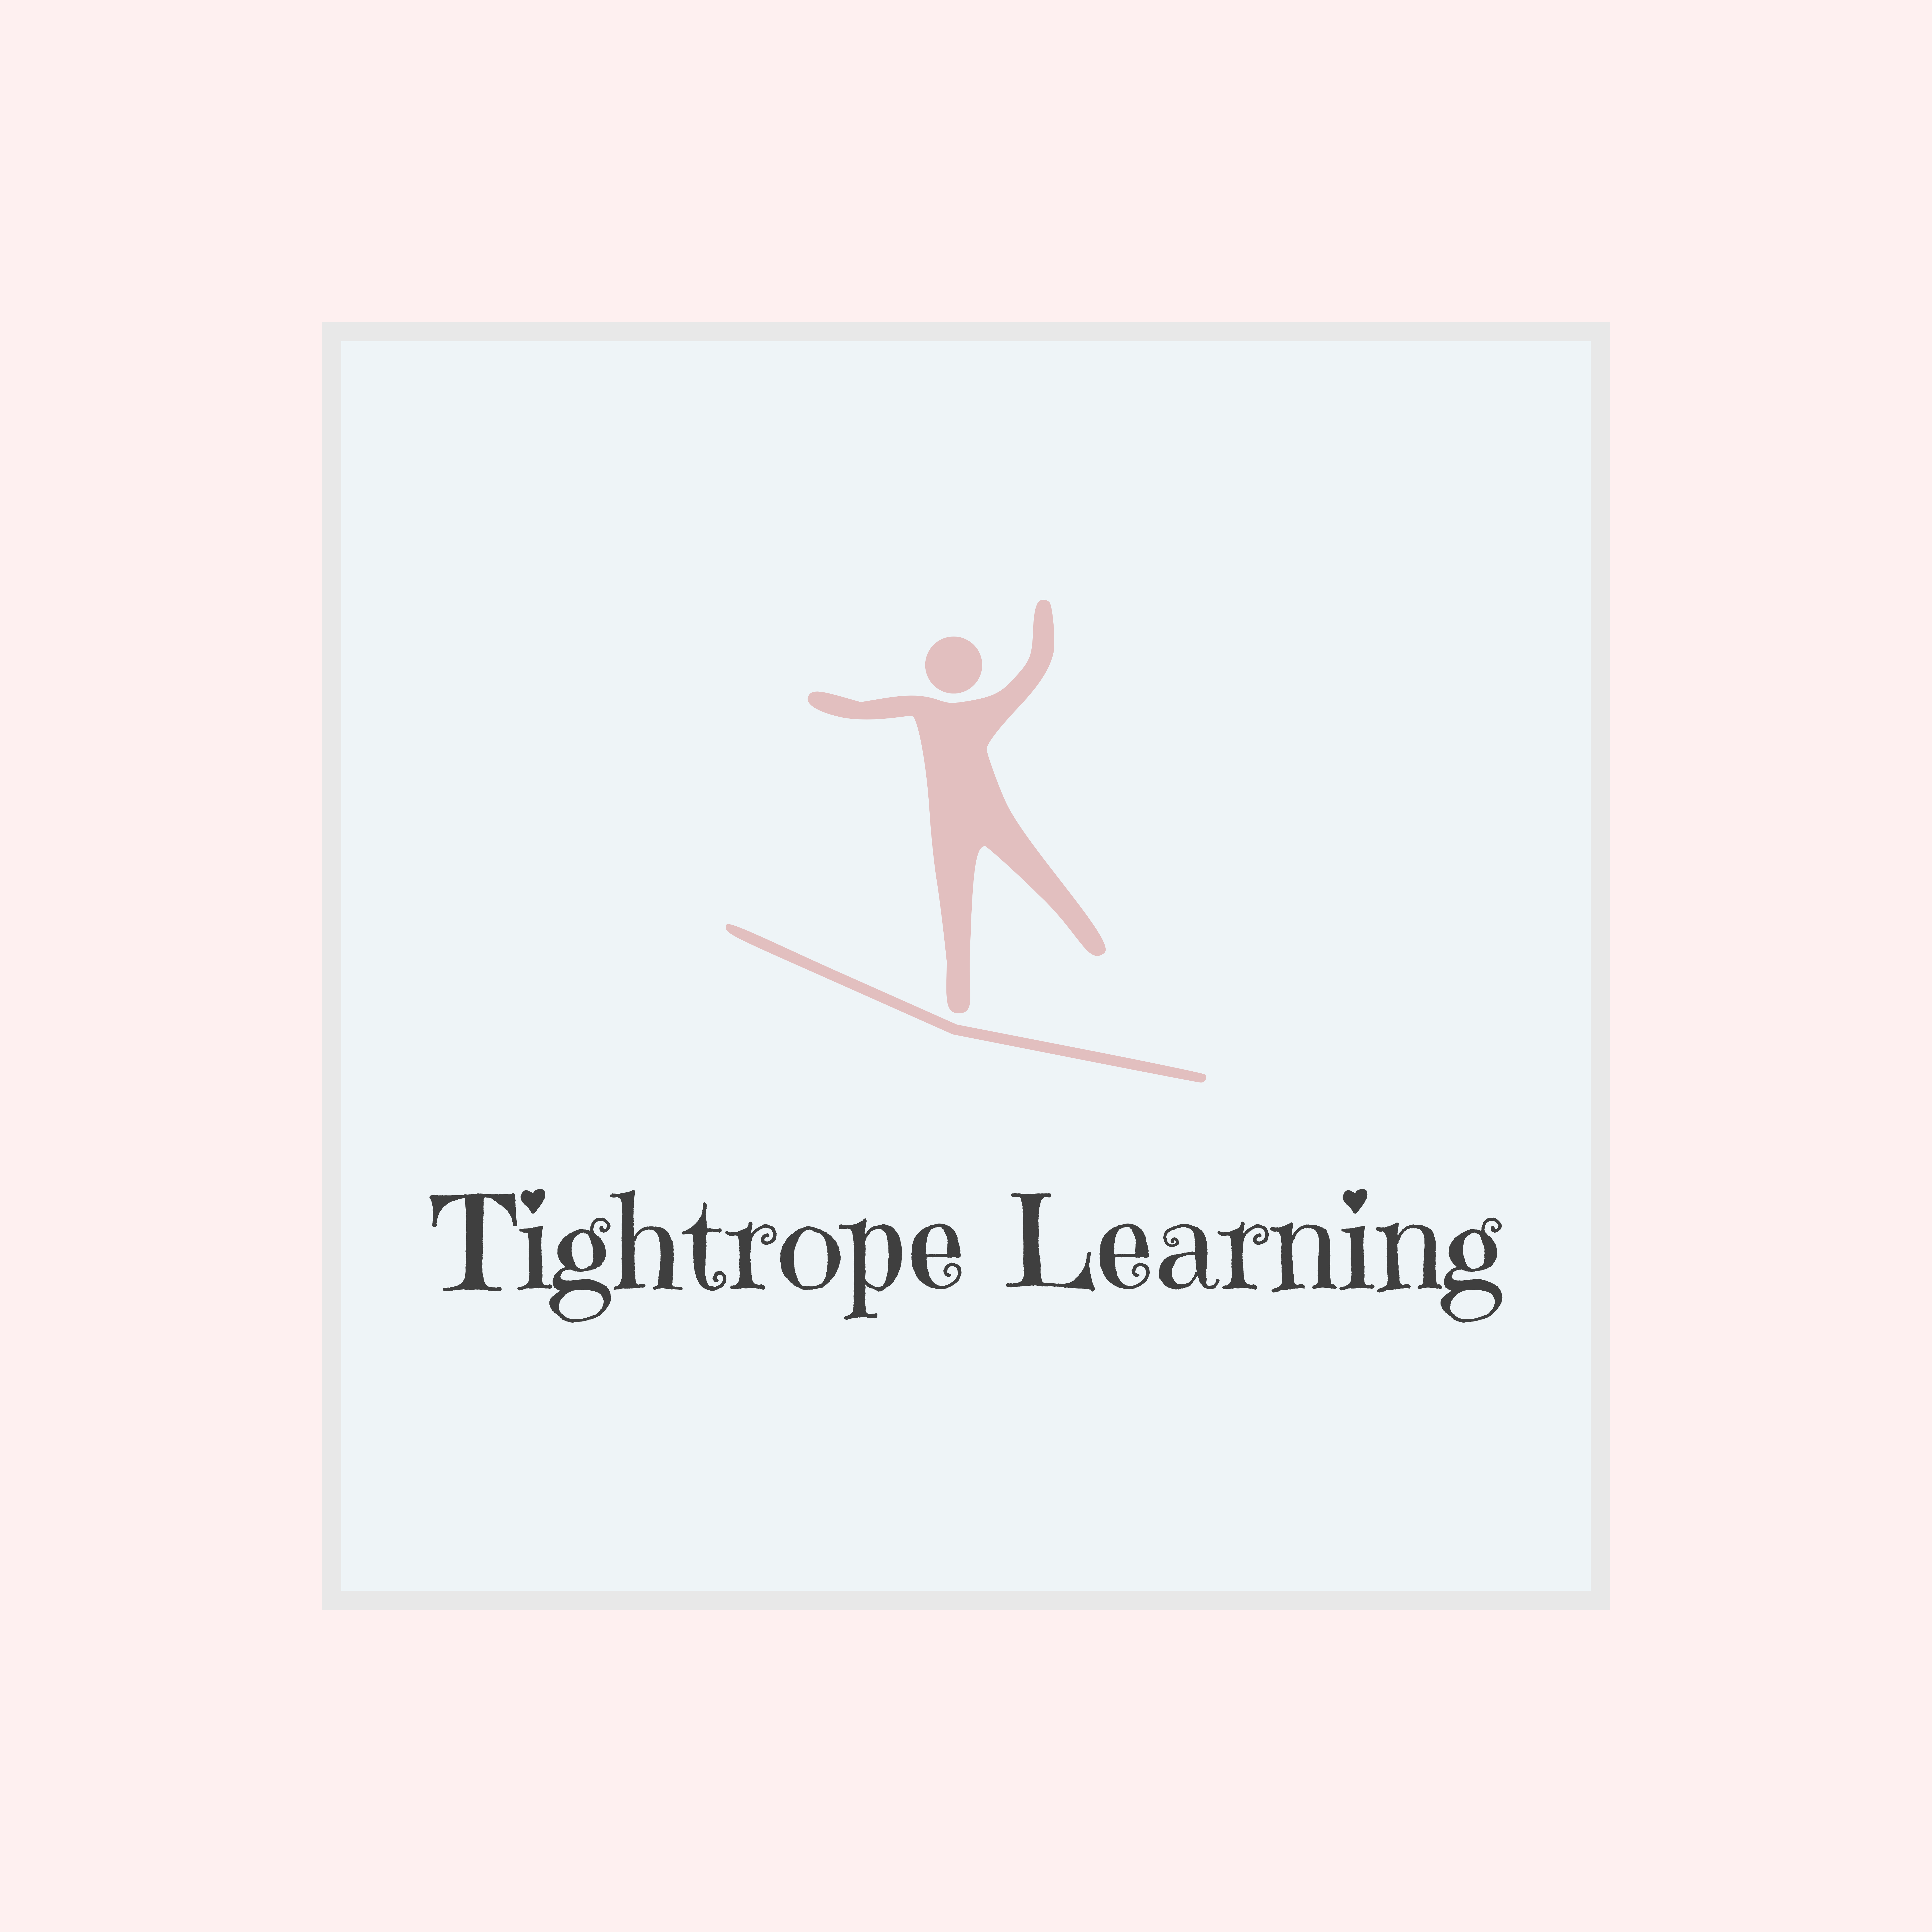 Tightrope Learning